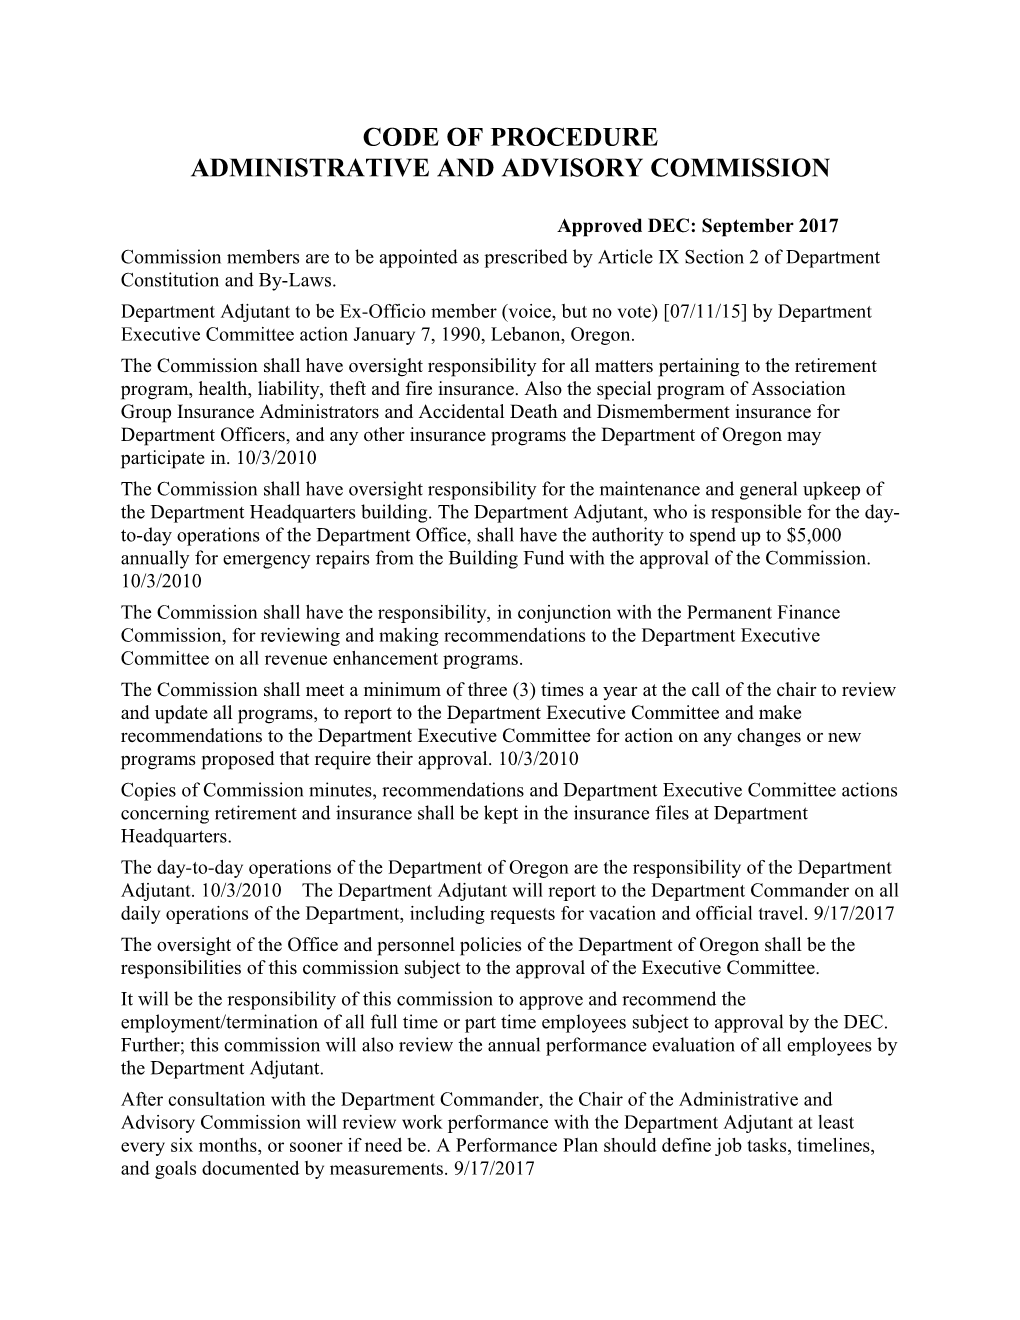 Administrative and Advisory Commission